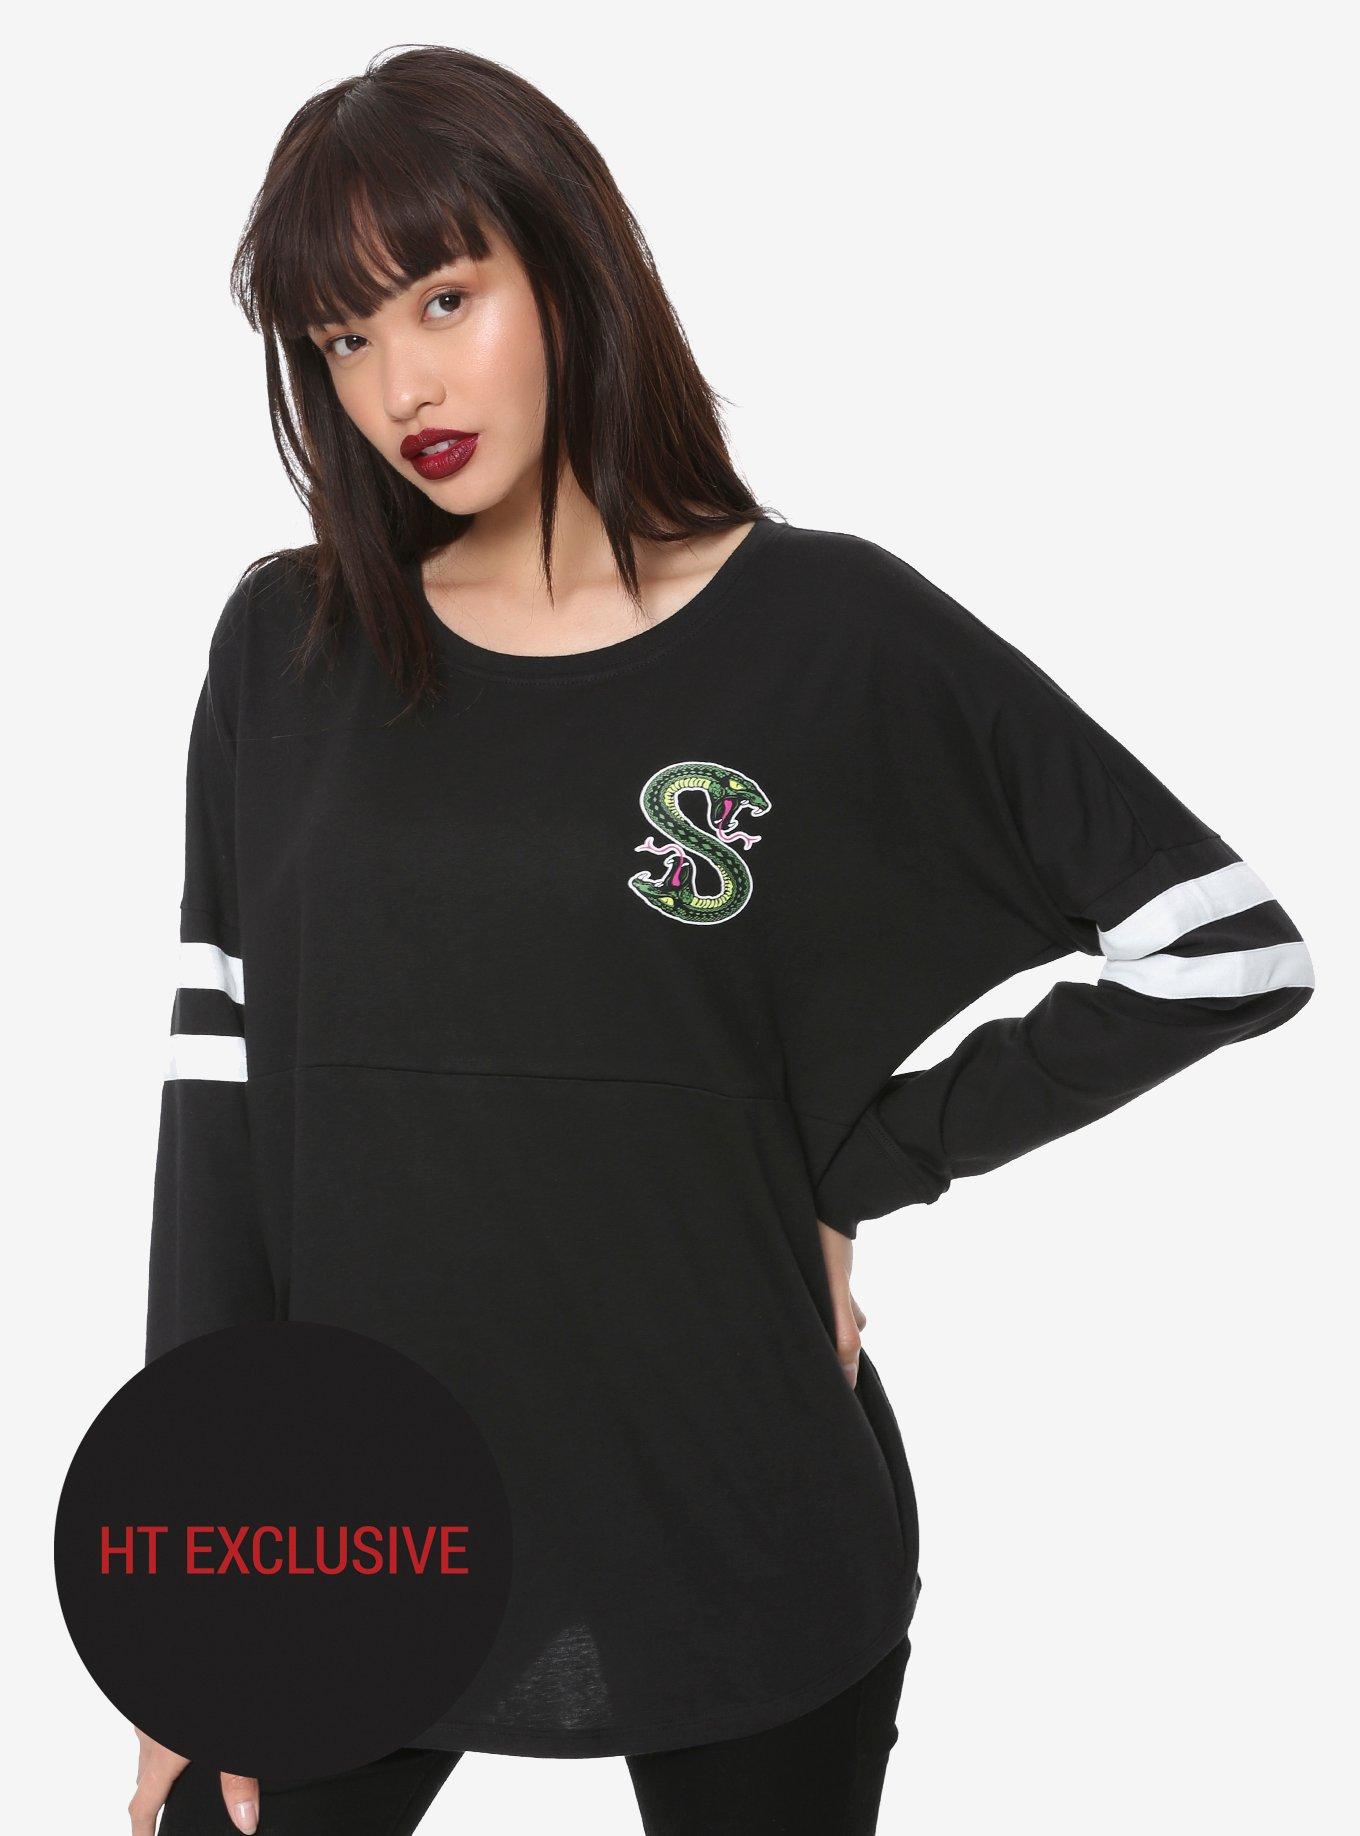 Riverdale Southside Serpents Girls Long-Sleeve Athletic Jersey Hot Topic Exclusive, MULTI COLOR, hi-res